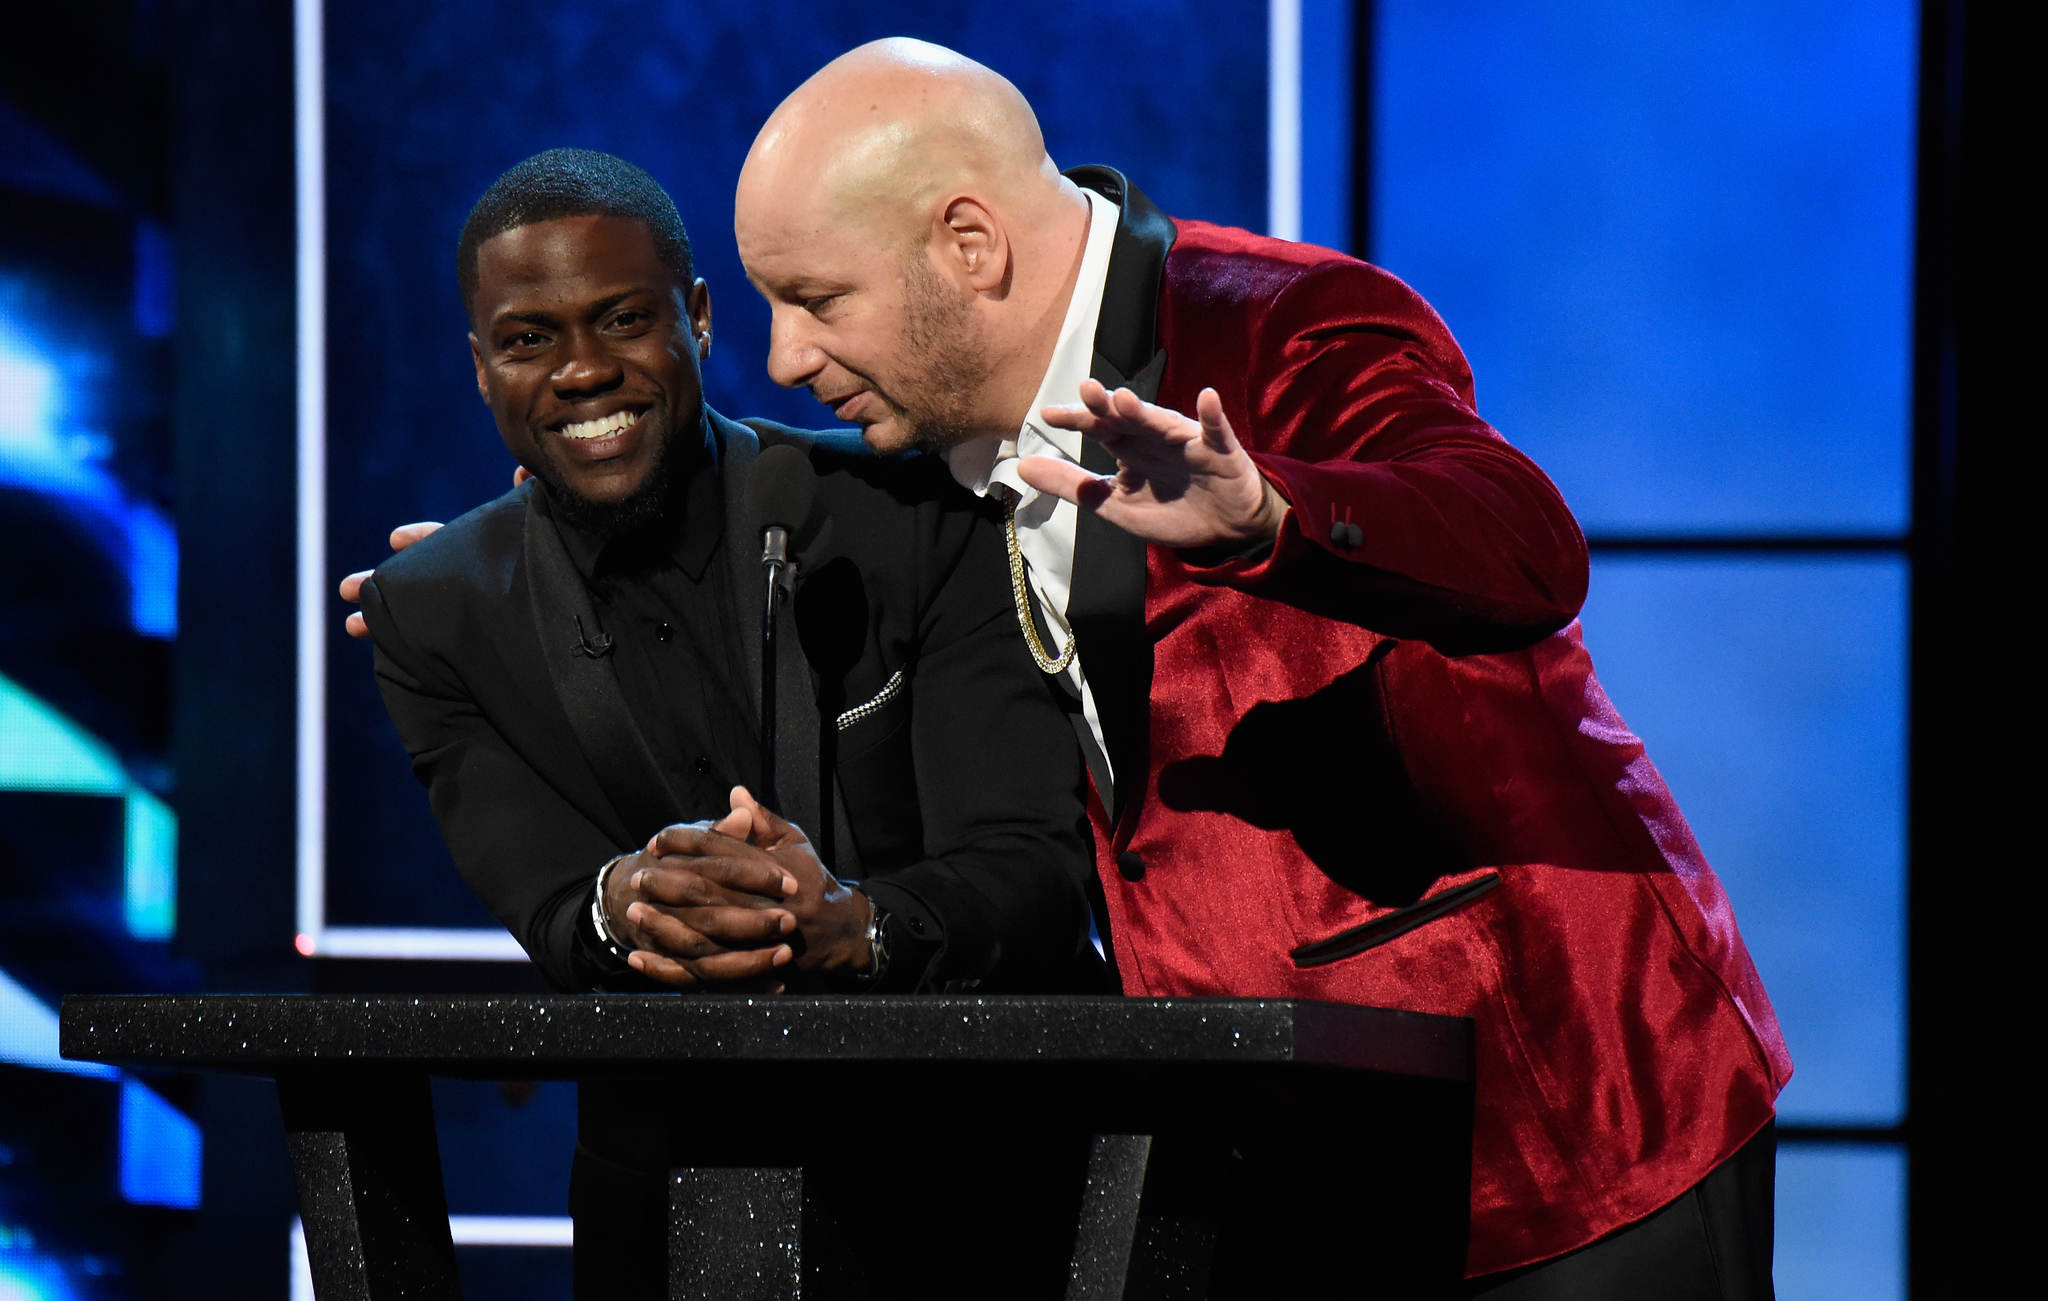 Kevin Hart and Jeffrey Ross at event of Comedy Central Roast of Justin Bieber (2015)